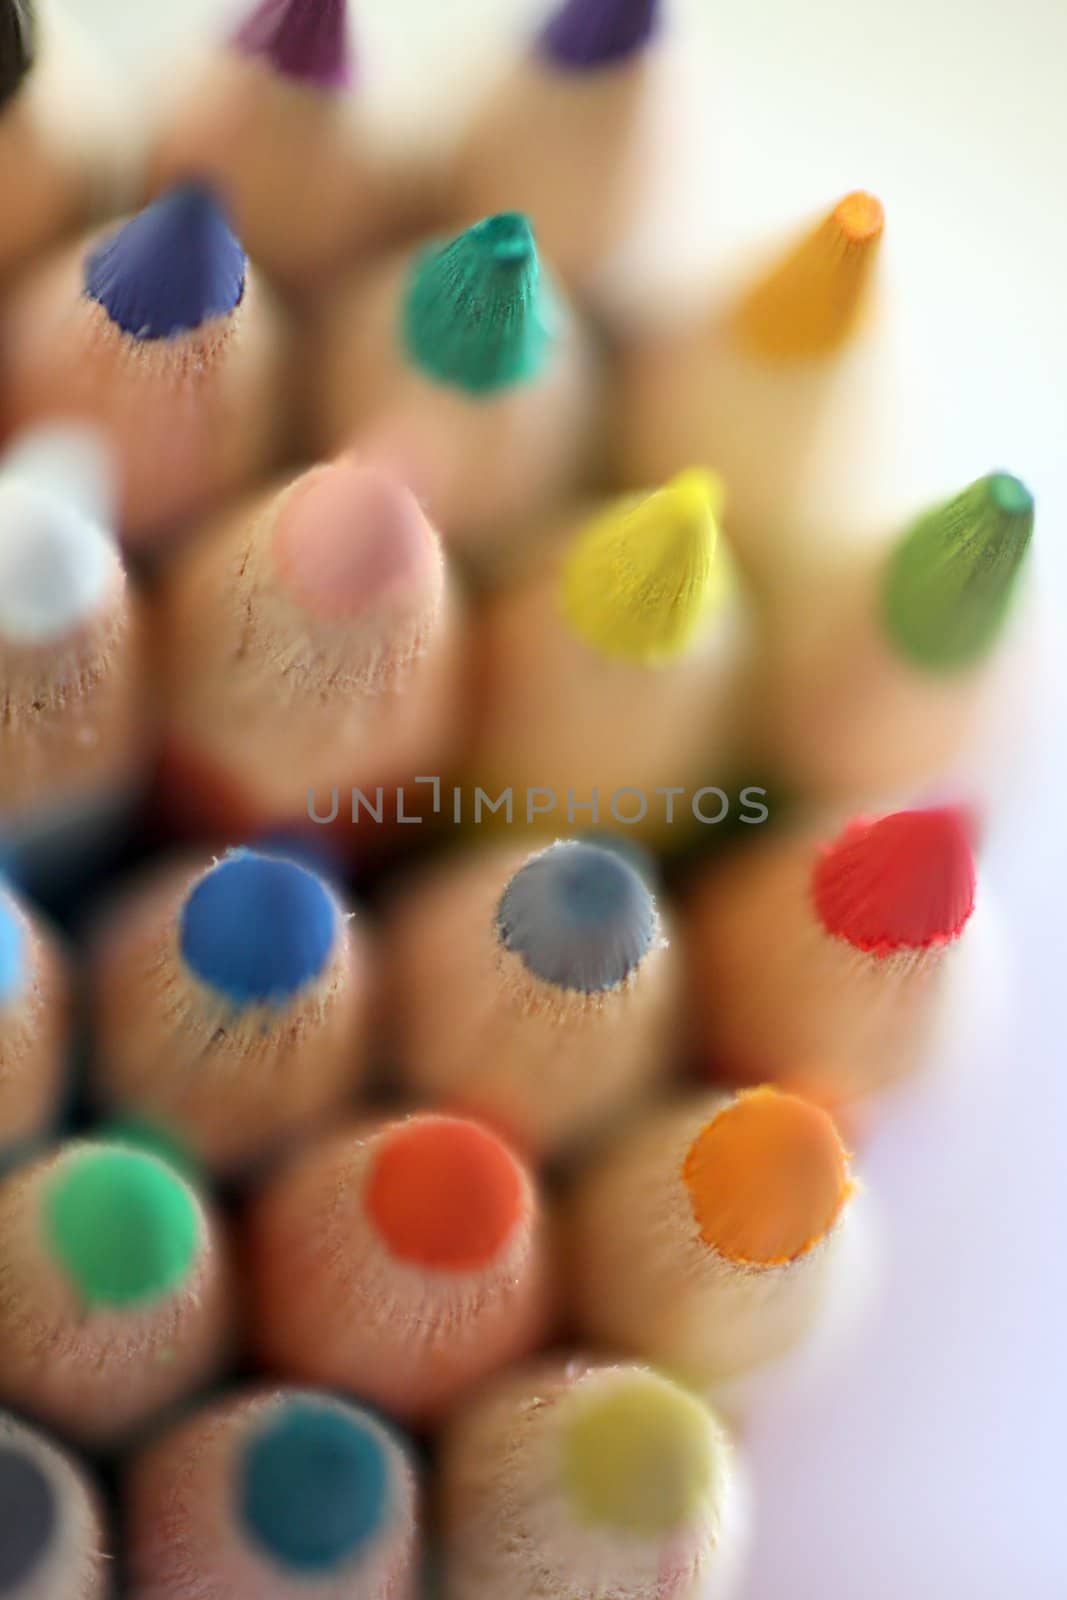 An extreme macro view of colour pencils arranged in a row